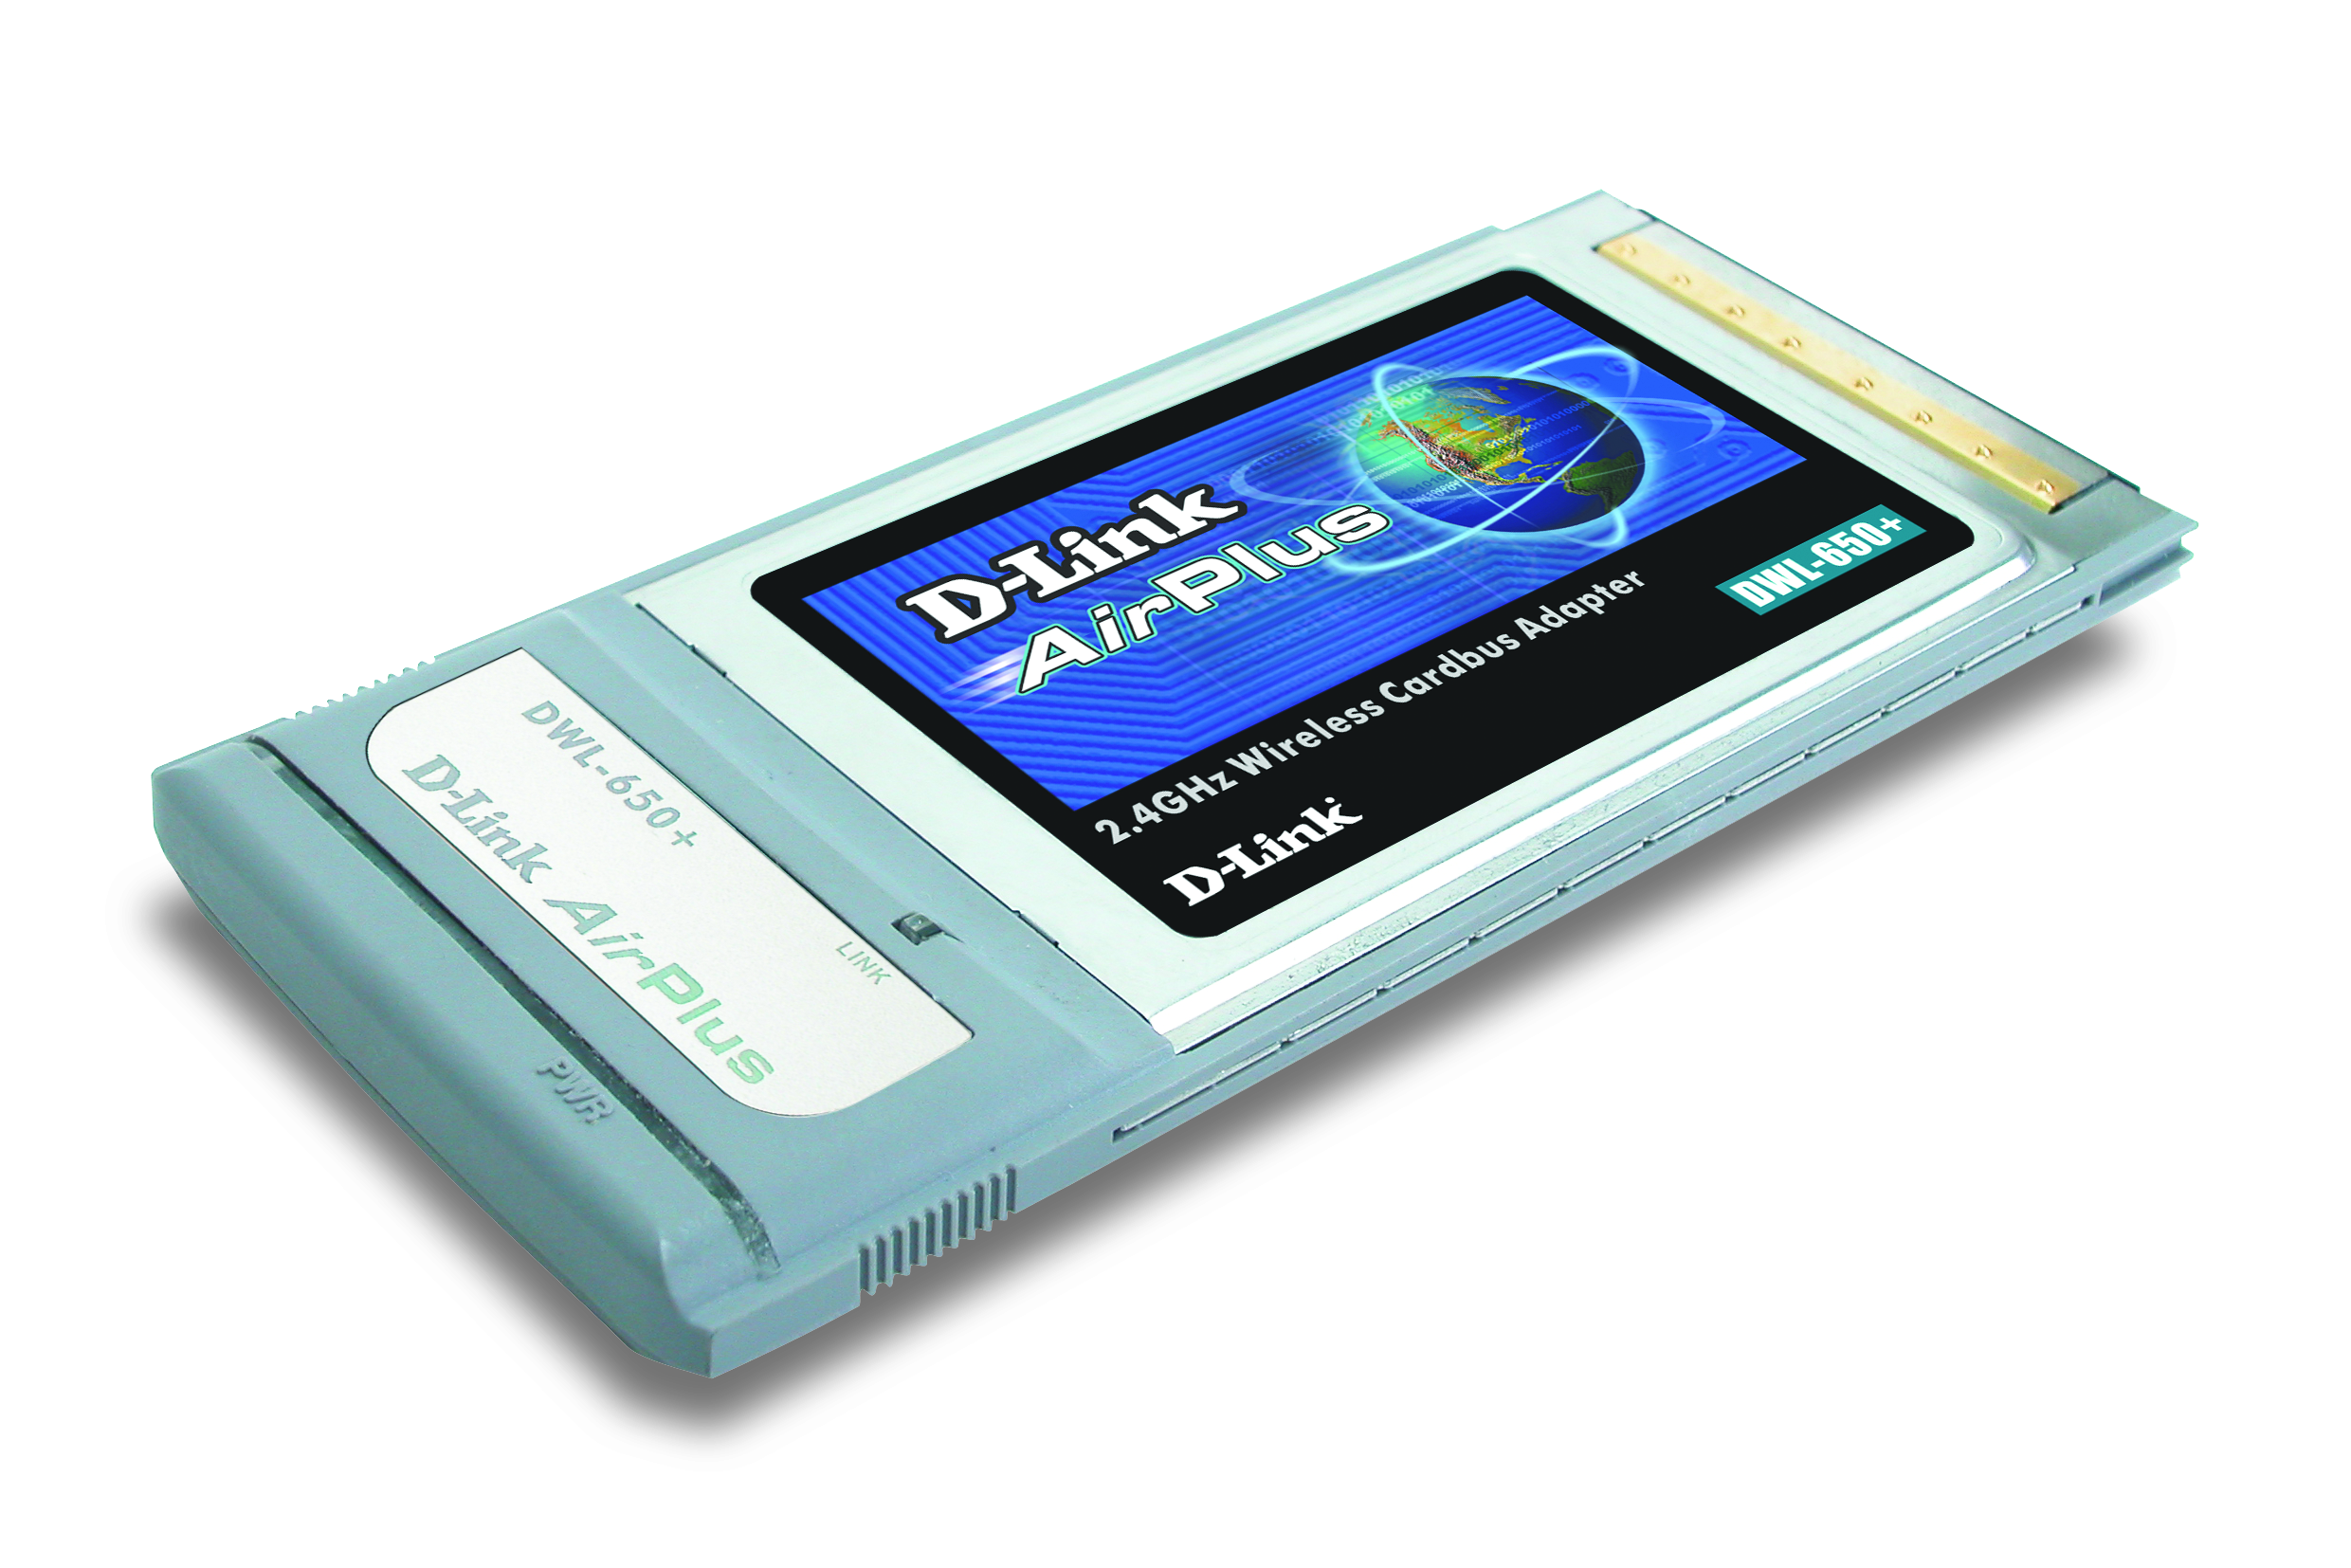 D-link airplus g510 driver